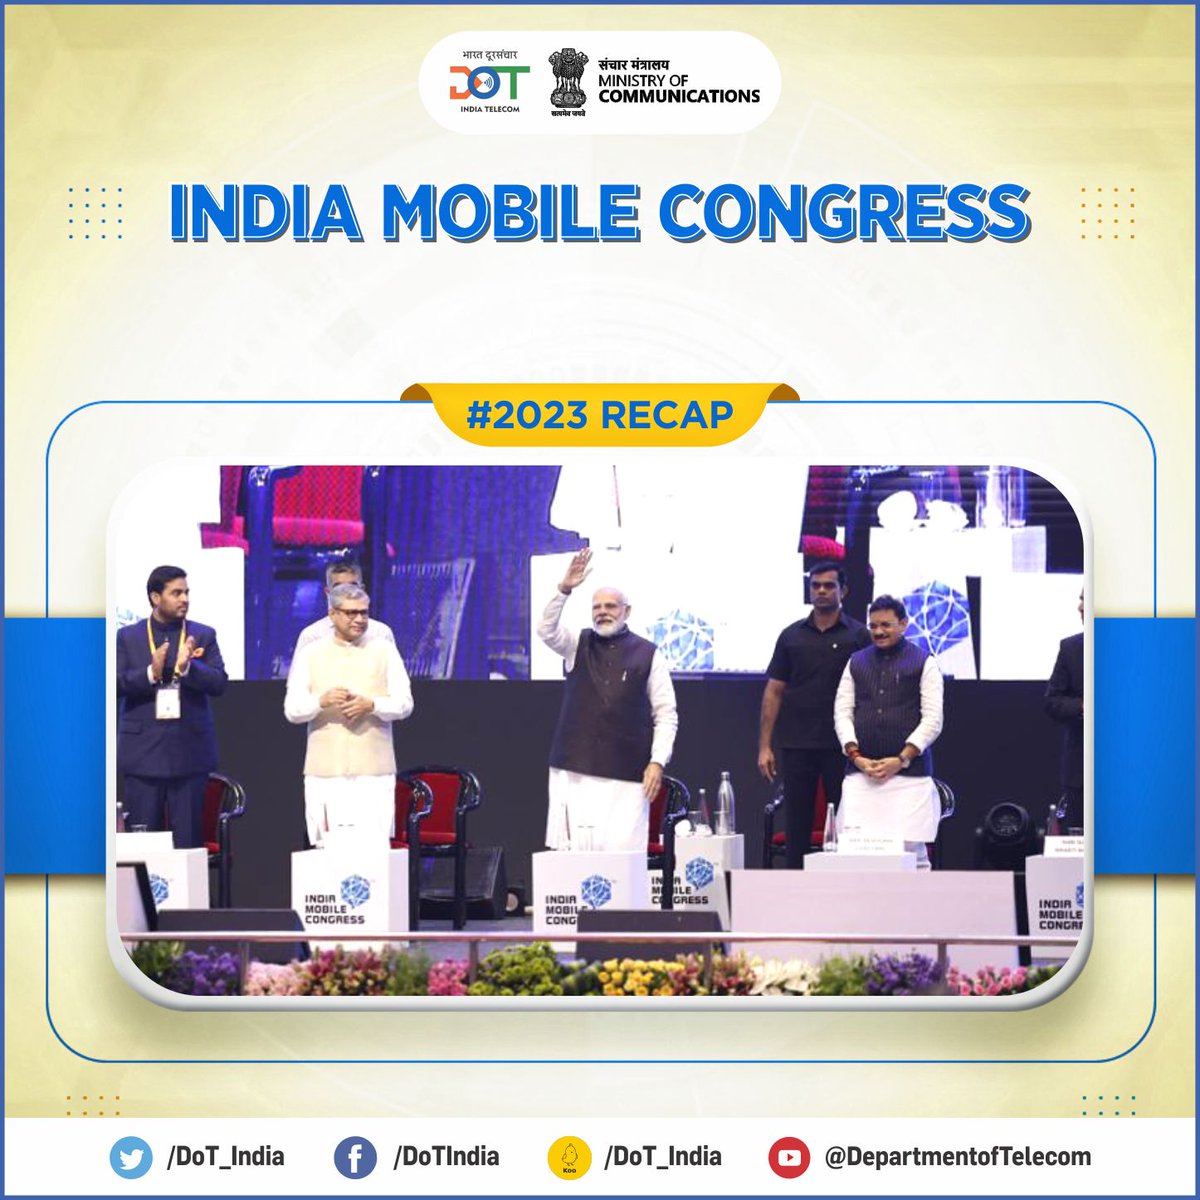 #2023RECAP
Reflecting another transformative moment in 2023! Hon'ble PM inaugurated the 7th Edition of India Mobile Congress, a testament to India's tech prowess. 100 '5G Use Case Labs' awarded to educational institutions #IMC2023  #YearInReview2023